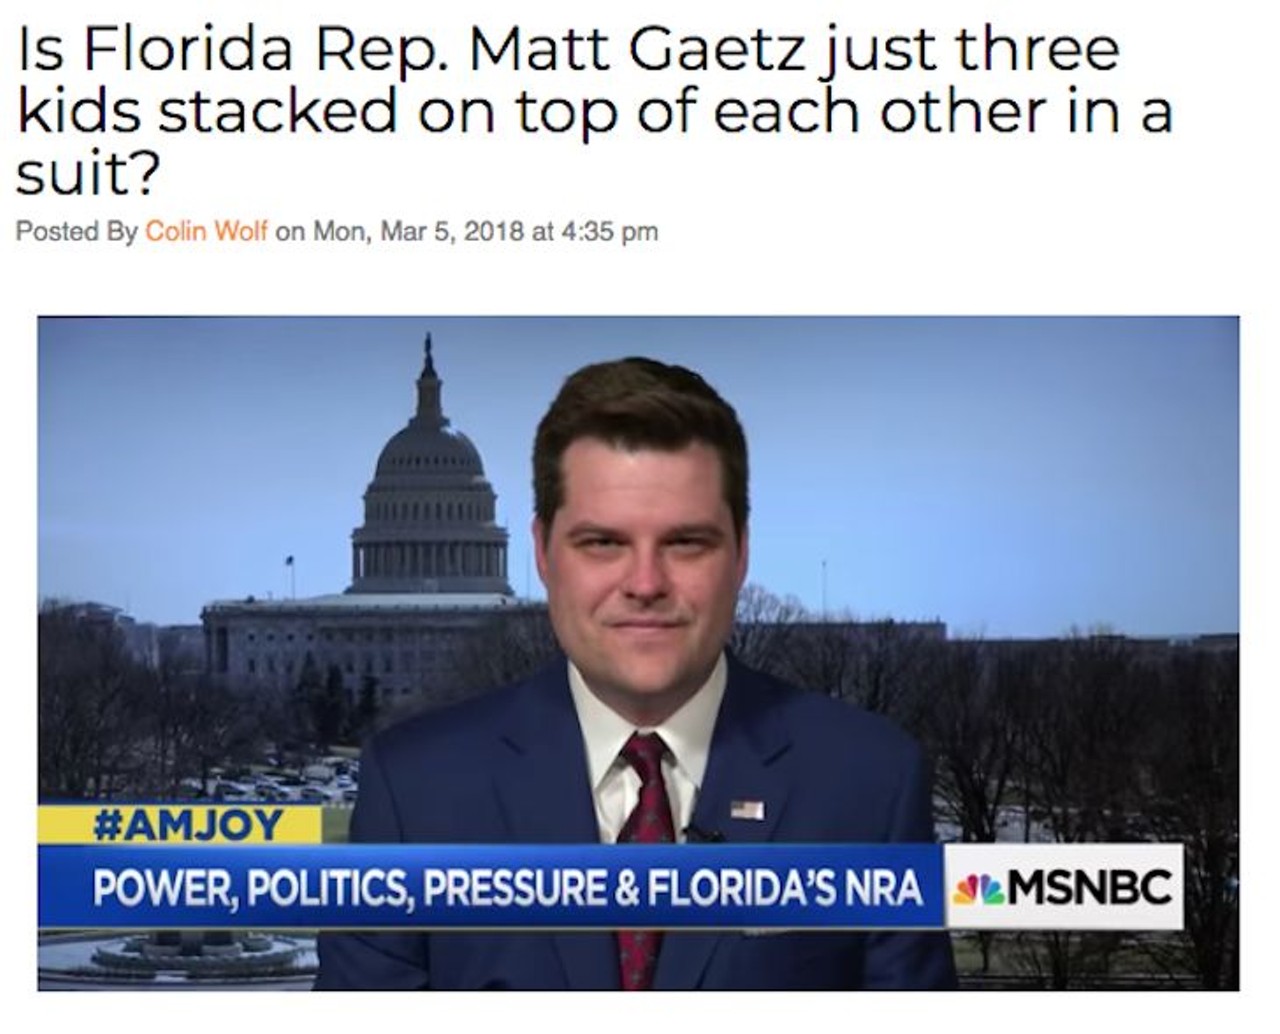 While appearing on MSNBC's AM Joy With Joy Reid, the Republican junior congressman became visibly uncomfortable when he wasn't served his usual Fox News softballs, and began to resemble what appeared to be just three wriggling kids stacked on top of each other in a grown man's suit. Read more here.